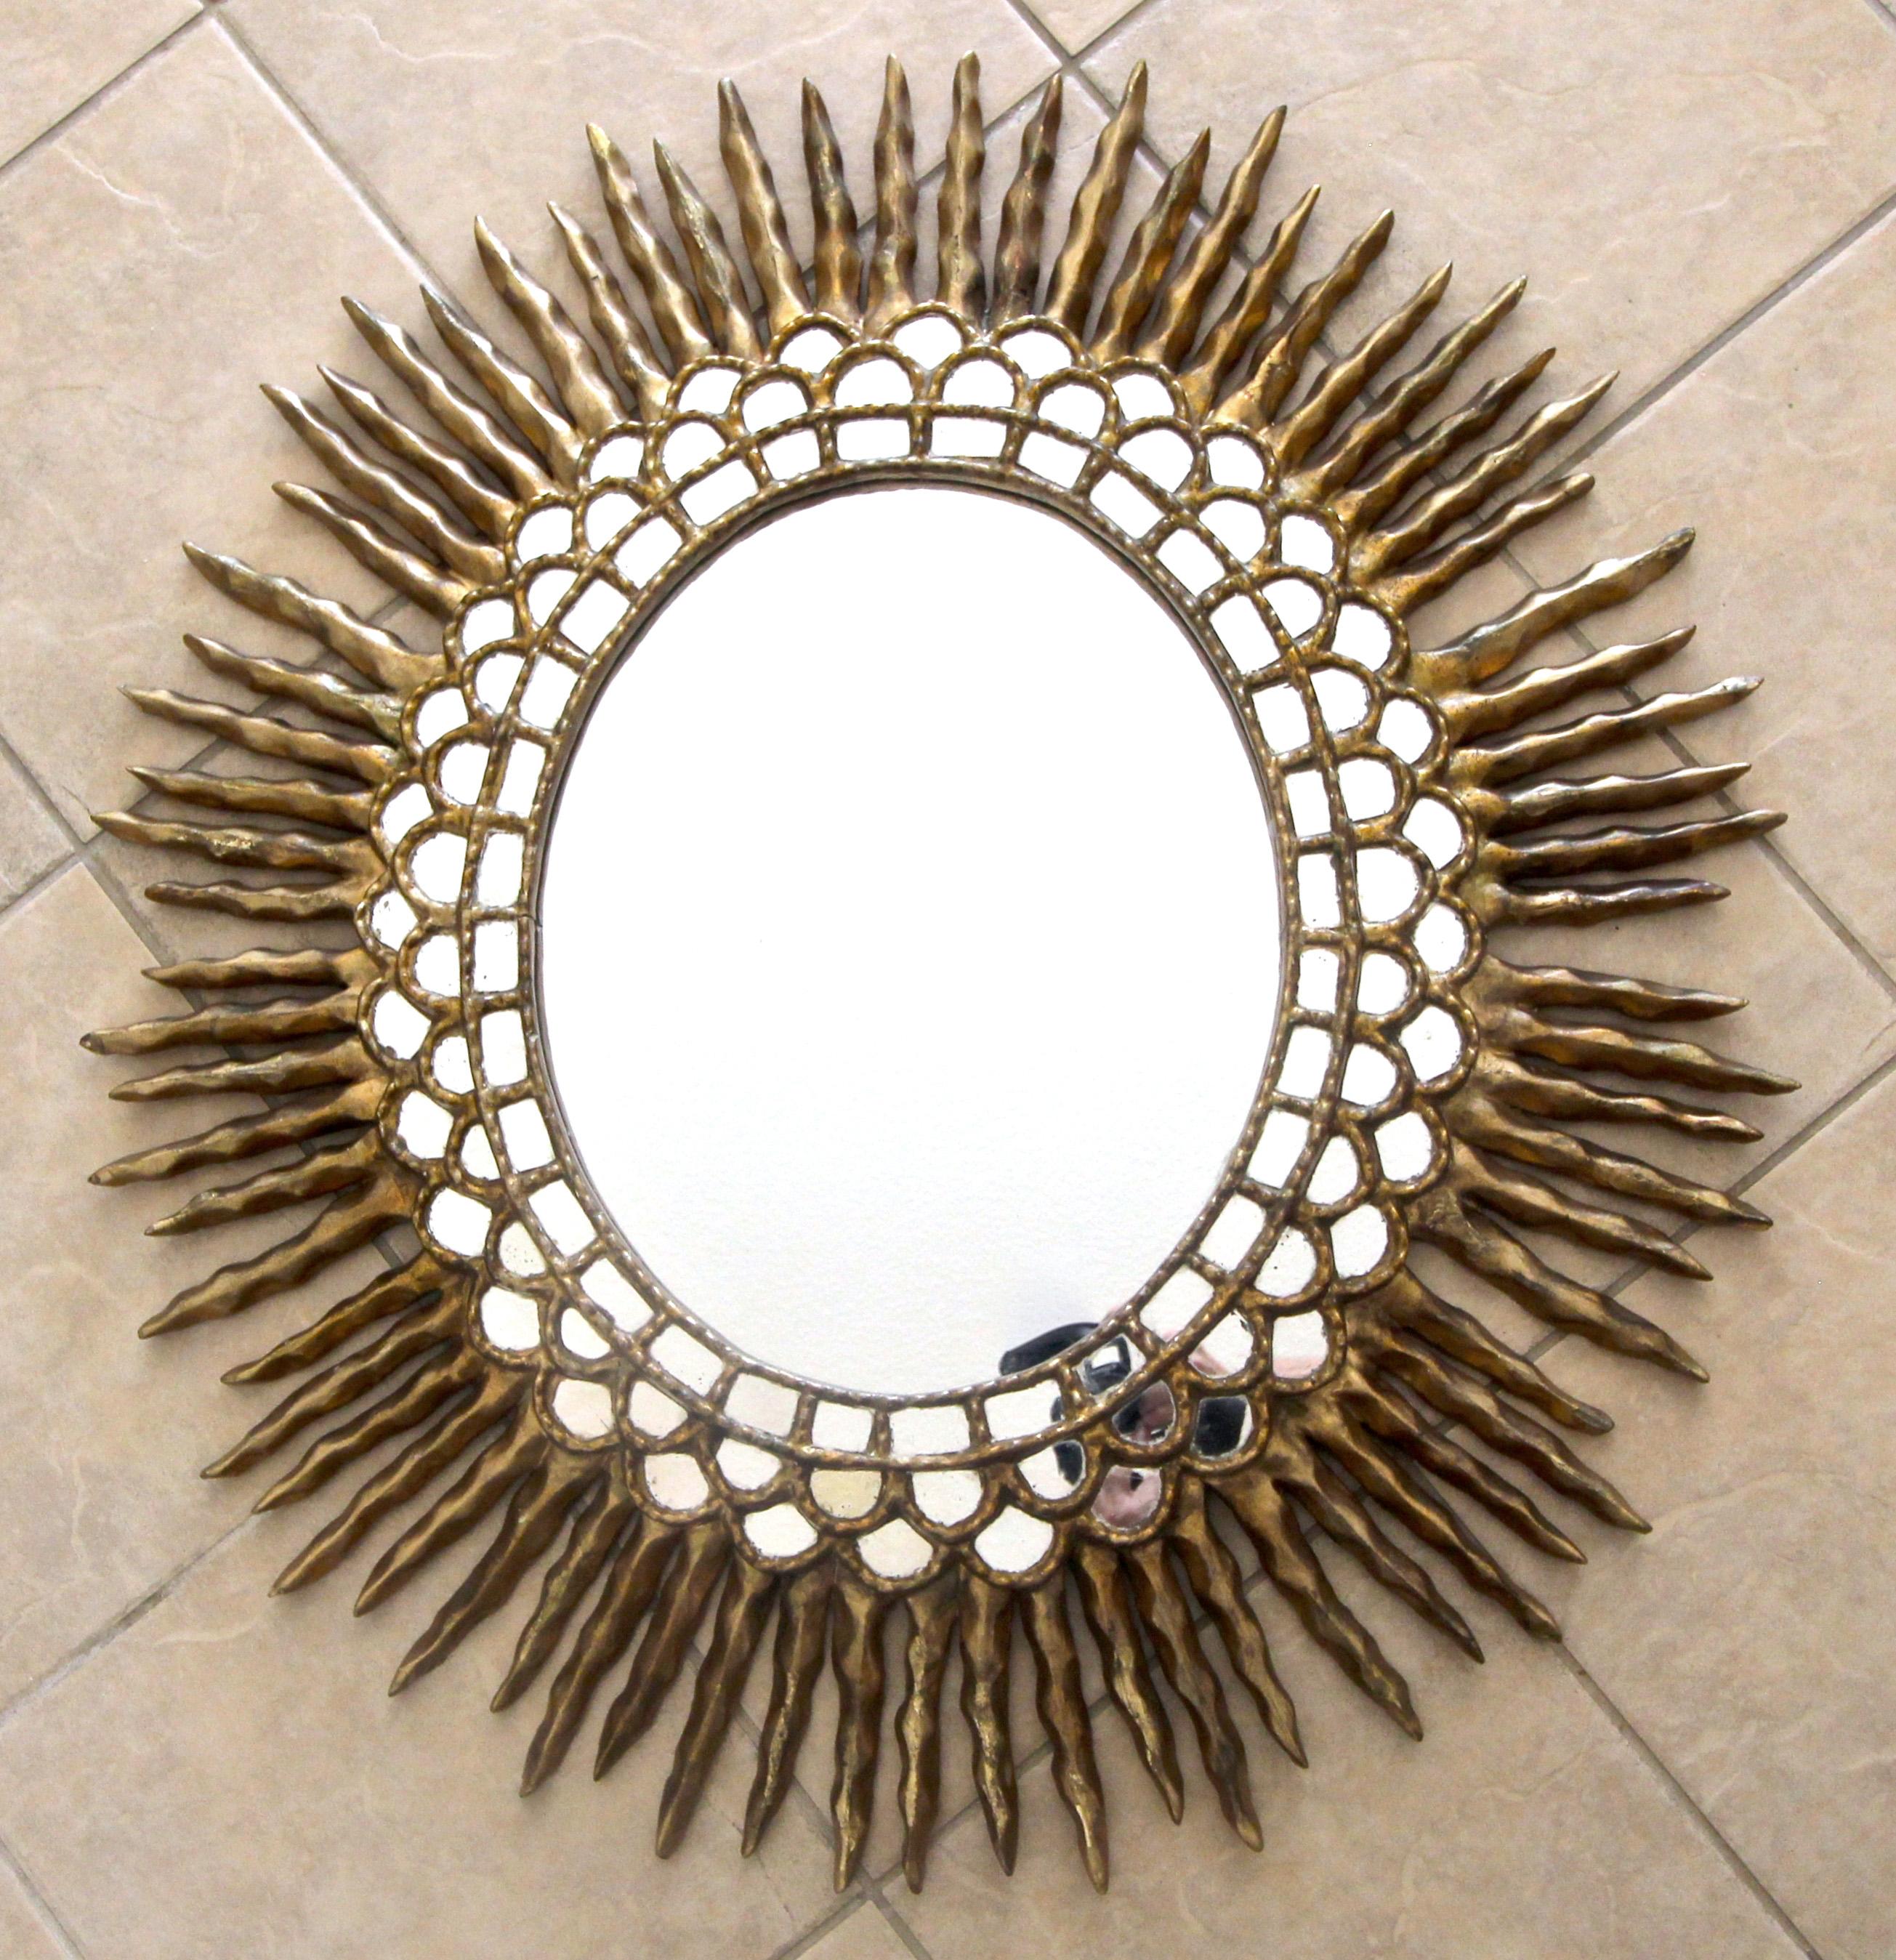 Huge hand-carved oval shaped colonial Spanish style wall mirror in gold gilt finish. Smaller rows of small inset mirrors encircle the large central mirror, and outer carved giltwood extended spikes or rays. 

Measures: 38